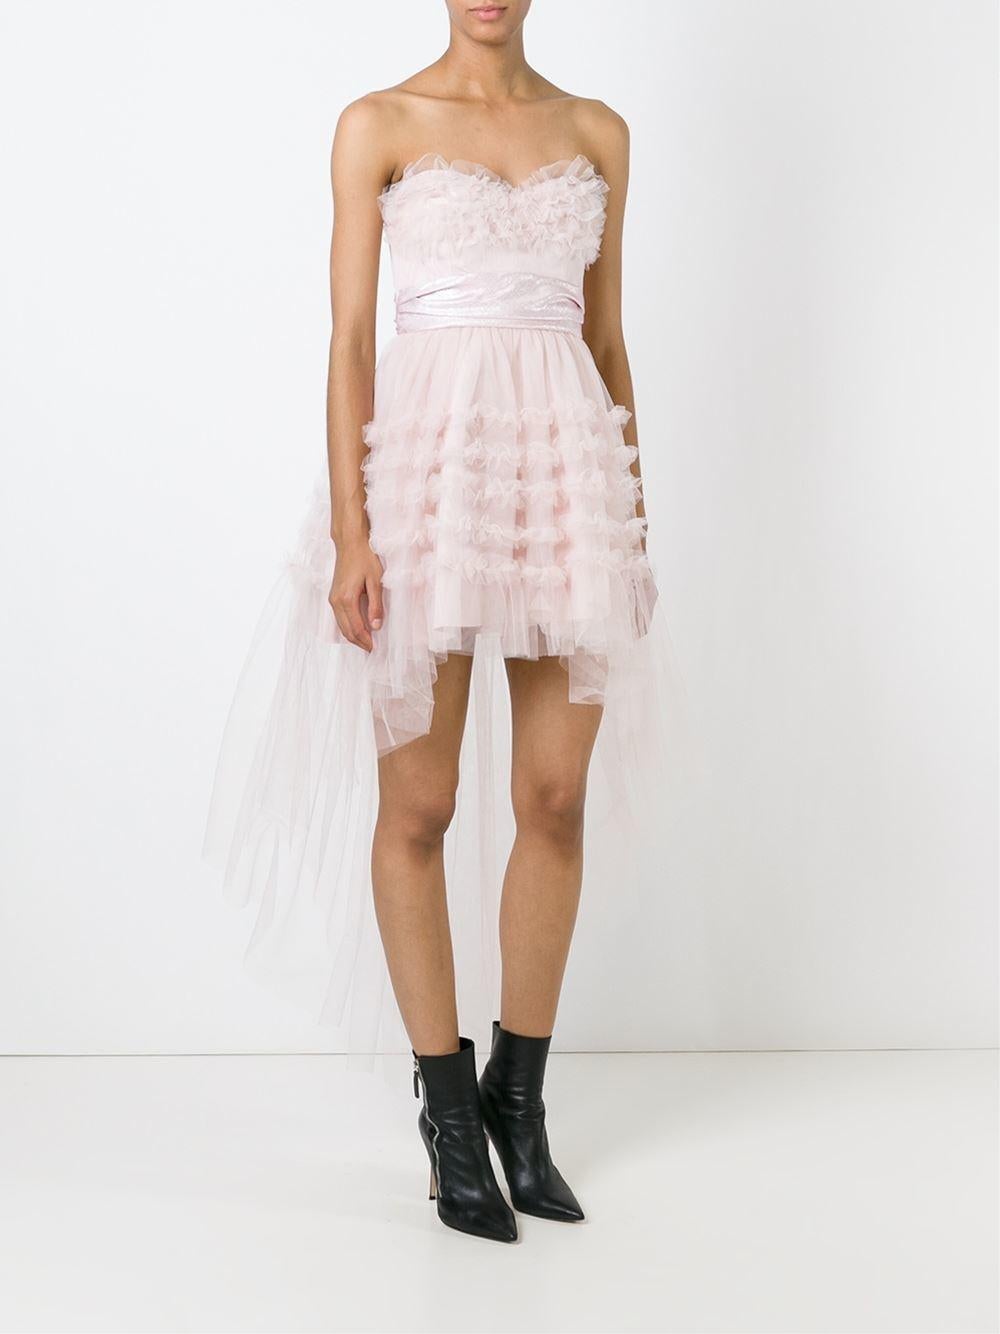 Saint Laurent Strapless Sweetheart Pink blush Dress With Ruffled Bodice And Skirt, Satin Bow And Fishtail Hem.
Pockets on the side.Corset built in. 100% Nylon Silk Lining Side Zip And Hook Closure. 
Size 38. Seen on Rose H. Whiteley and Miranda